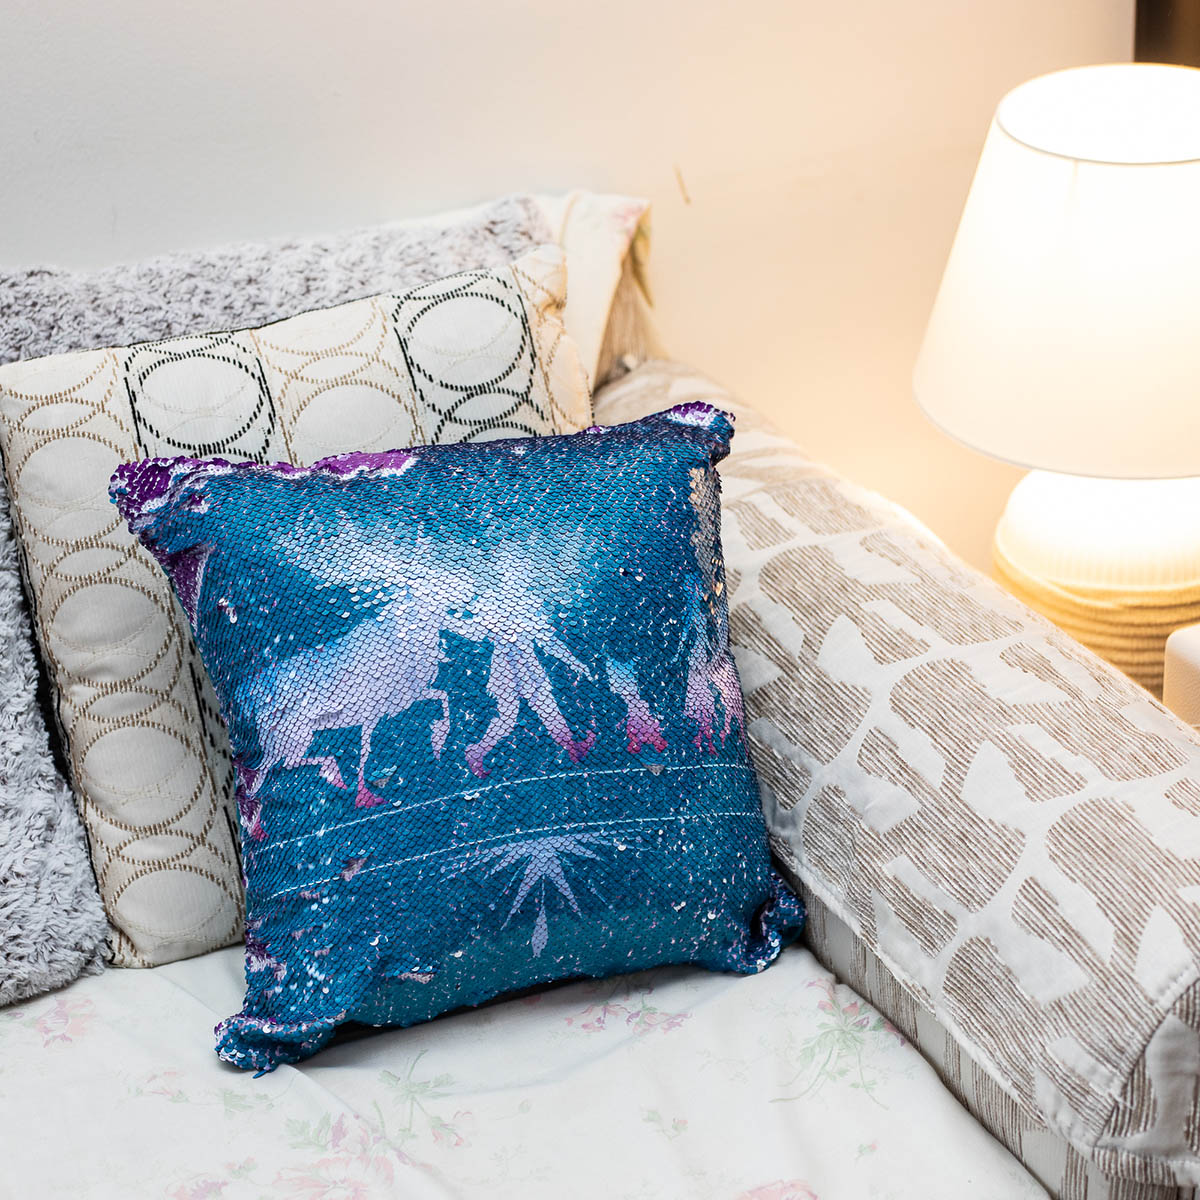 Frozen Two Way Sequence cushions